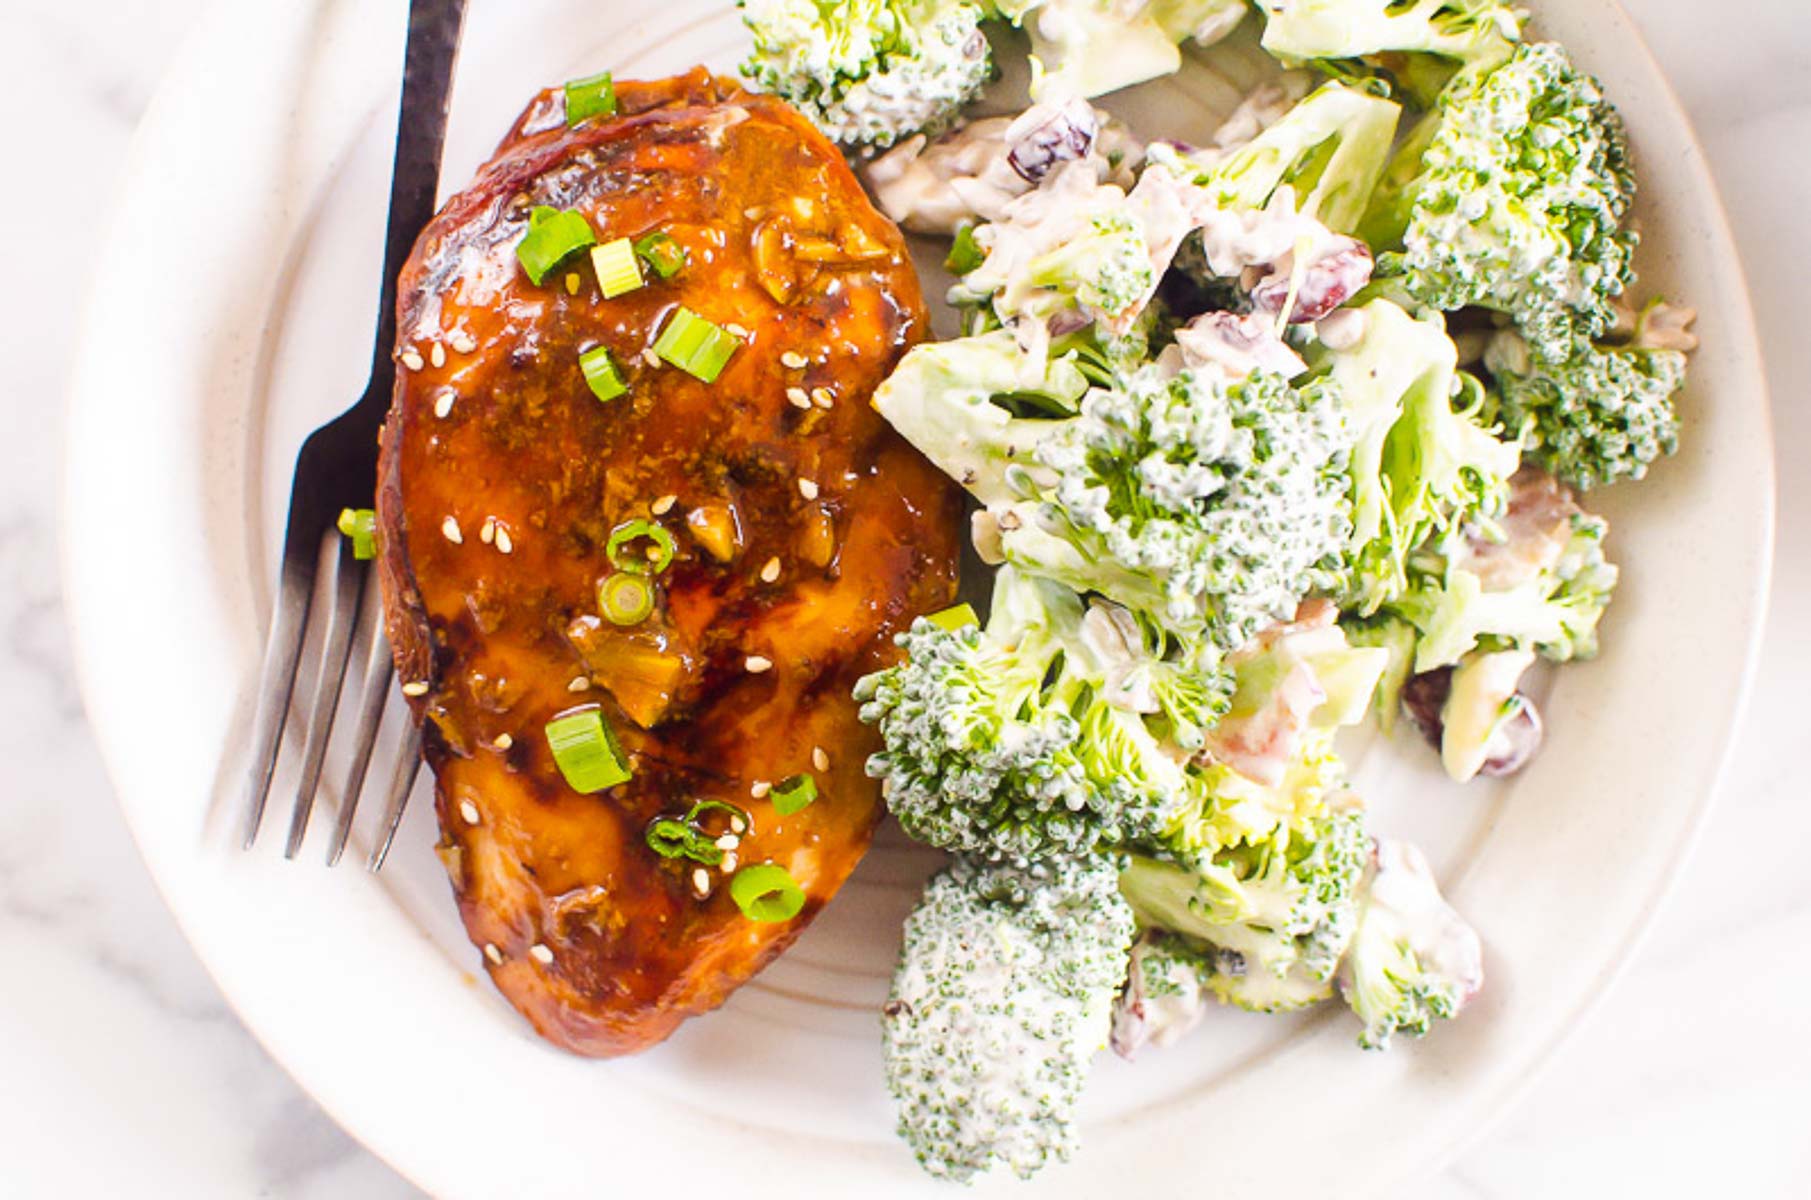 Baked honey garlic chicken breast on a plate with broccoli salad.